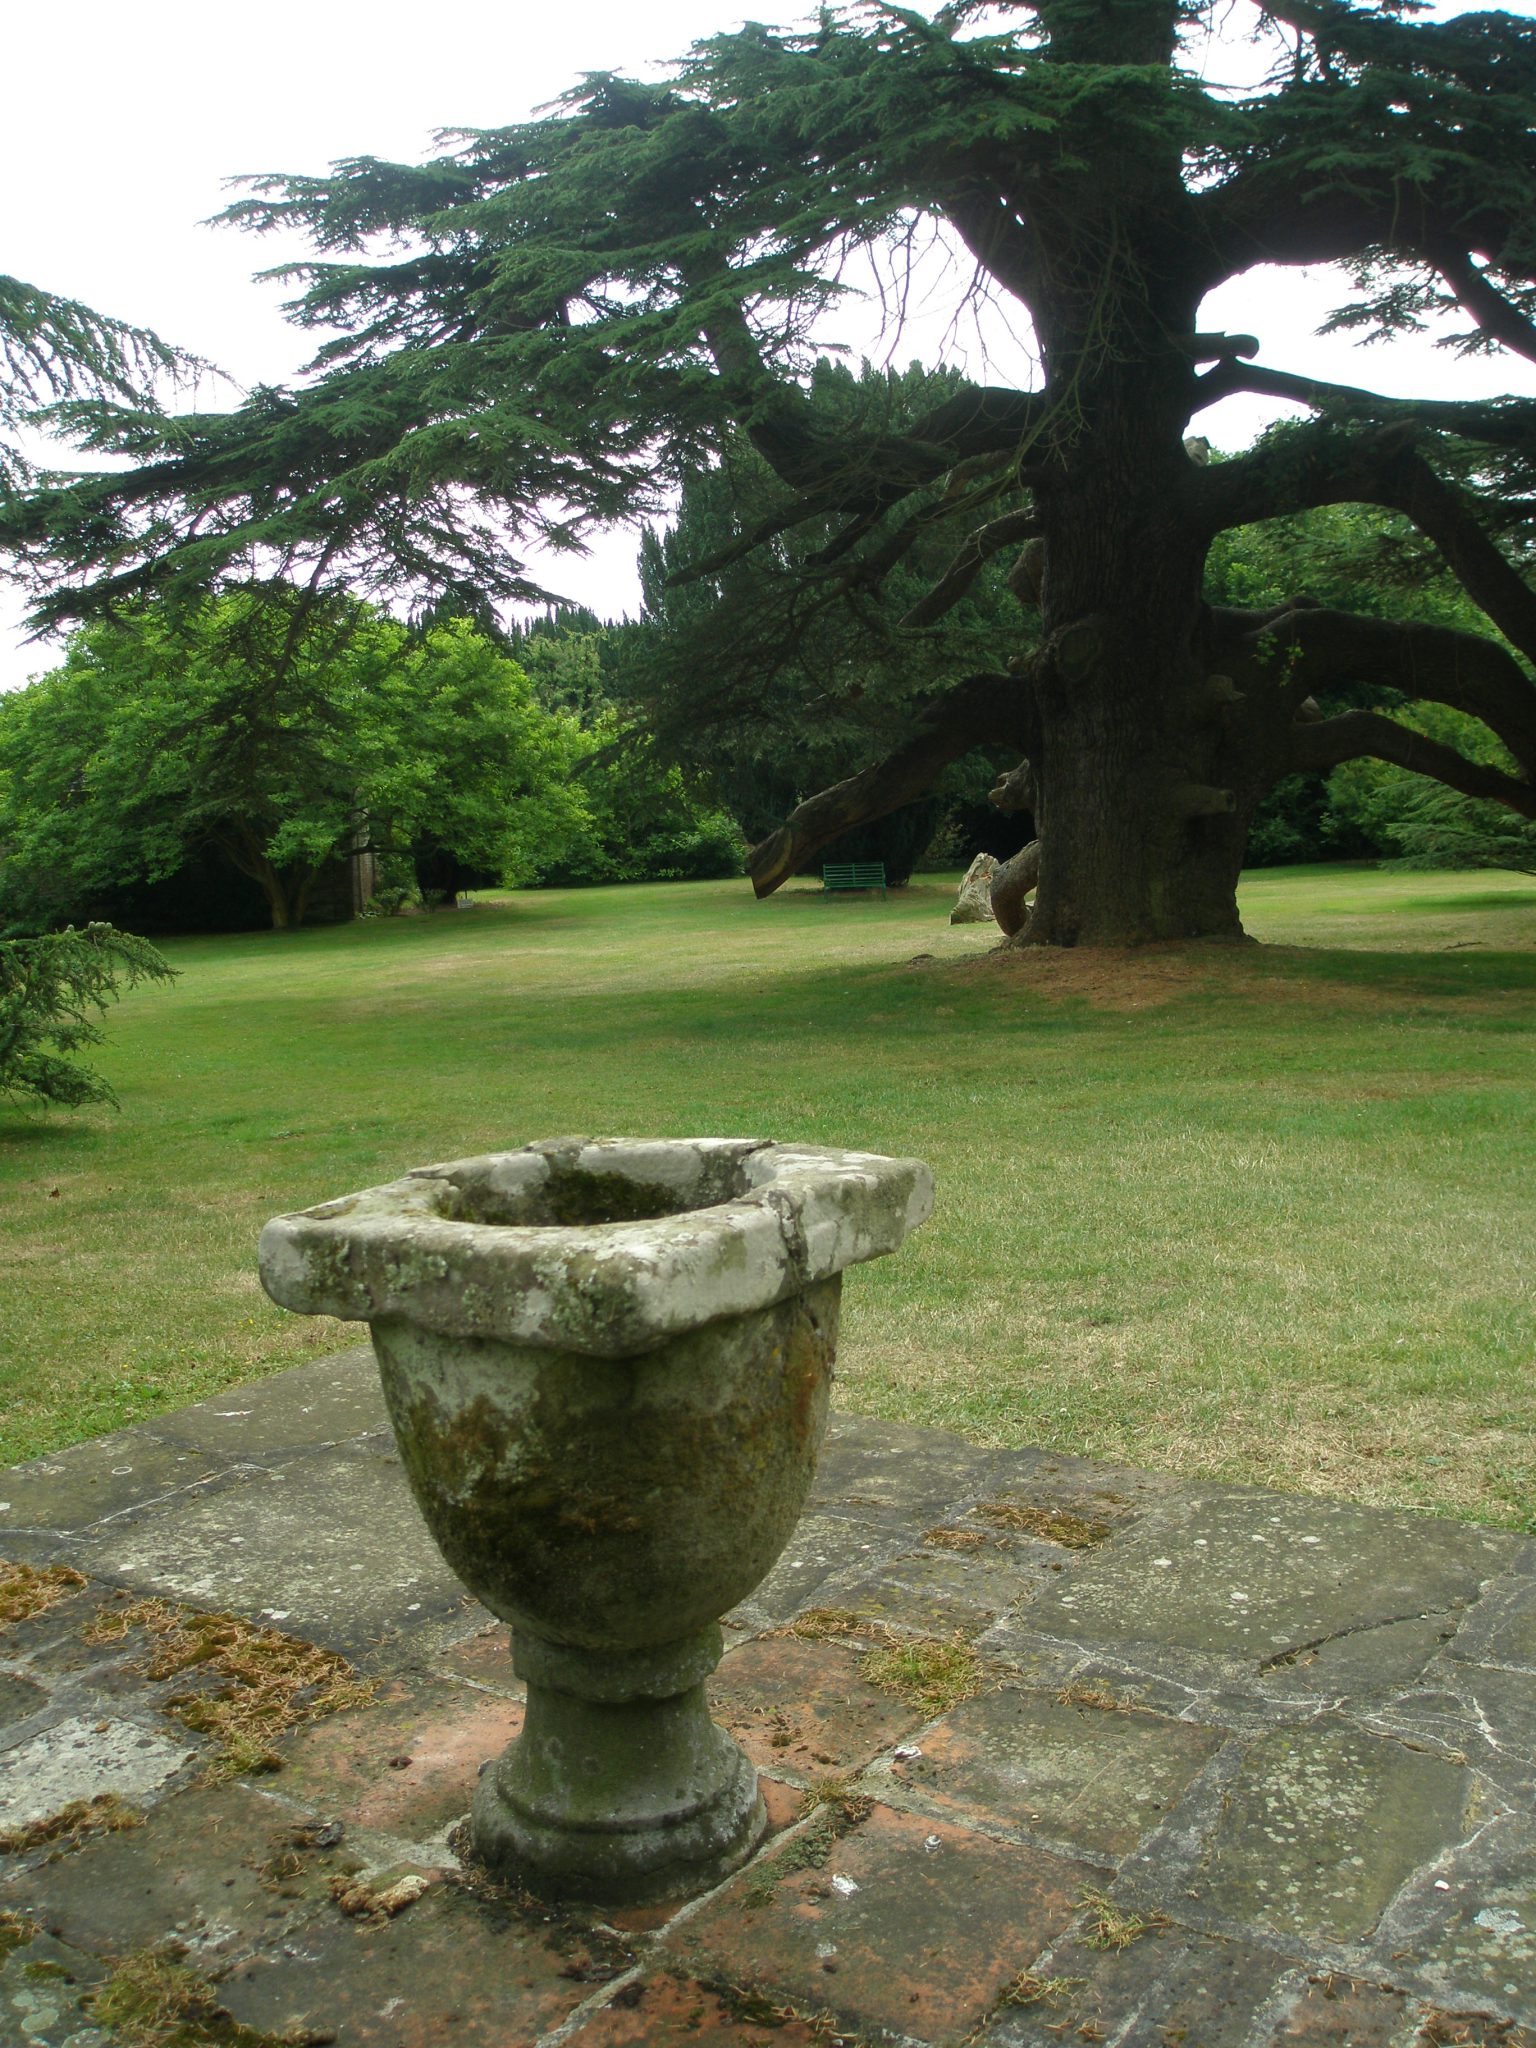 An Urn decorates the lawn, near the base of the Cedar of Lebanon tree.